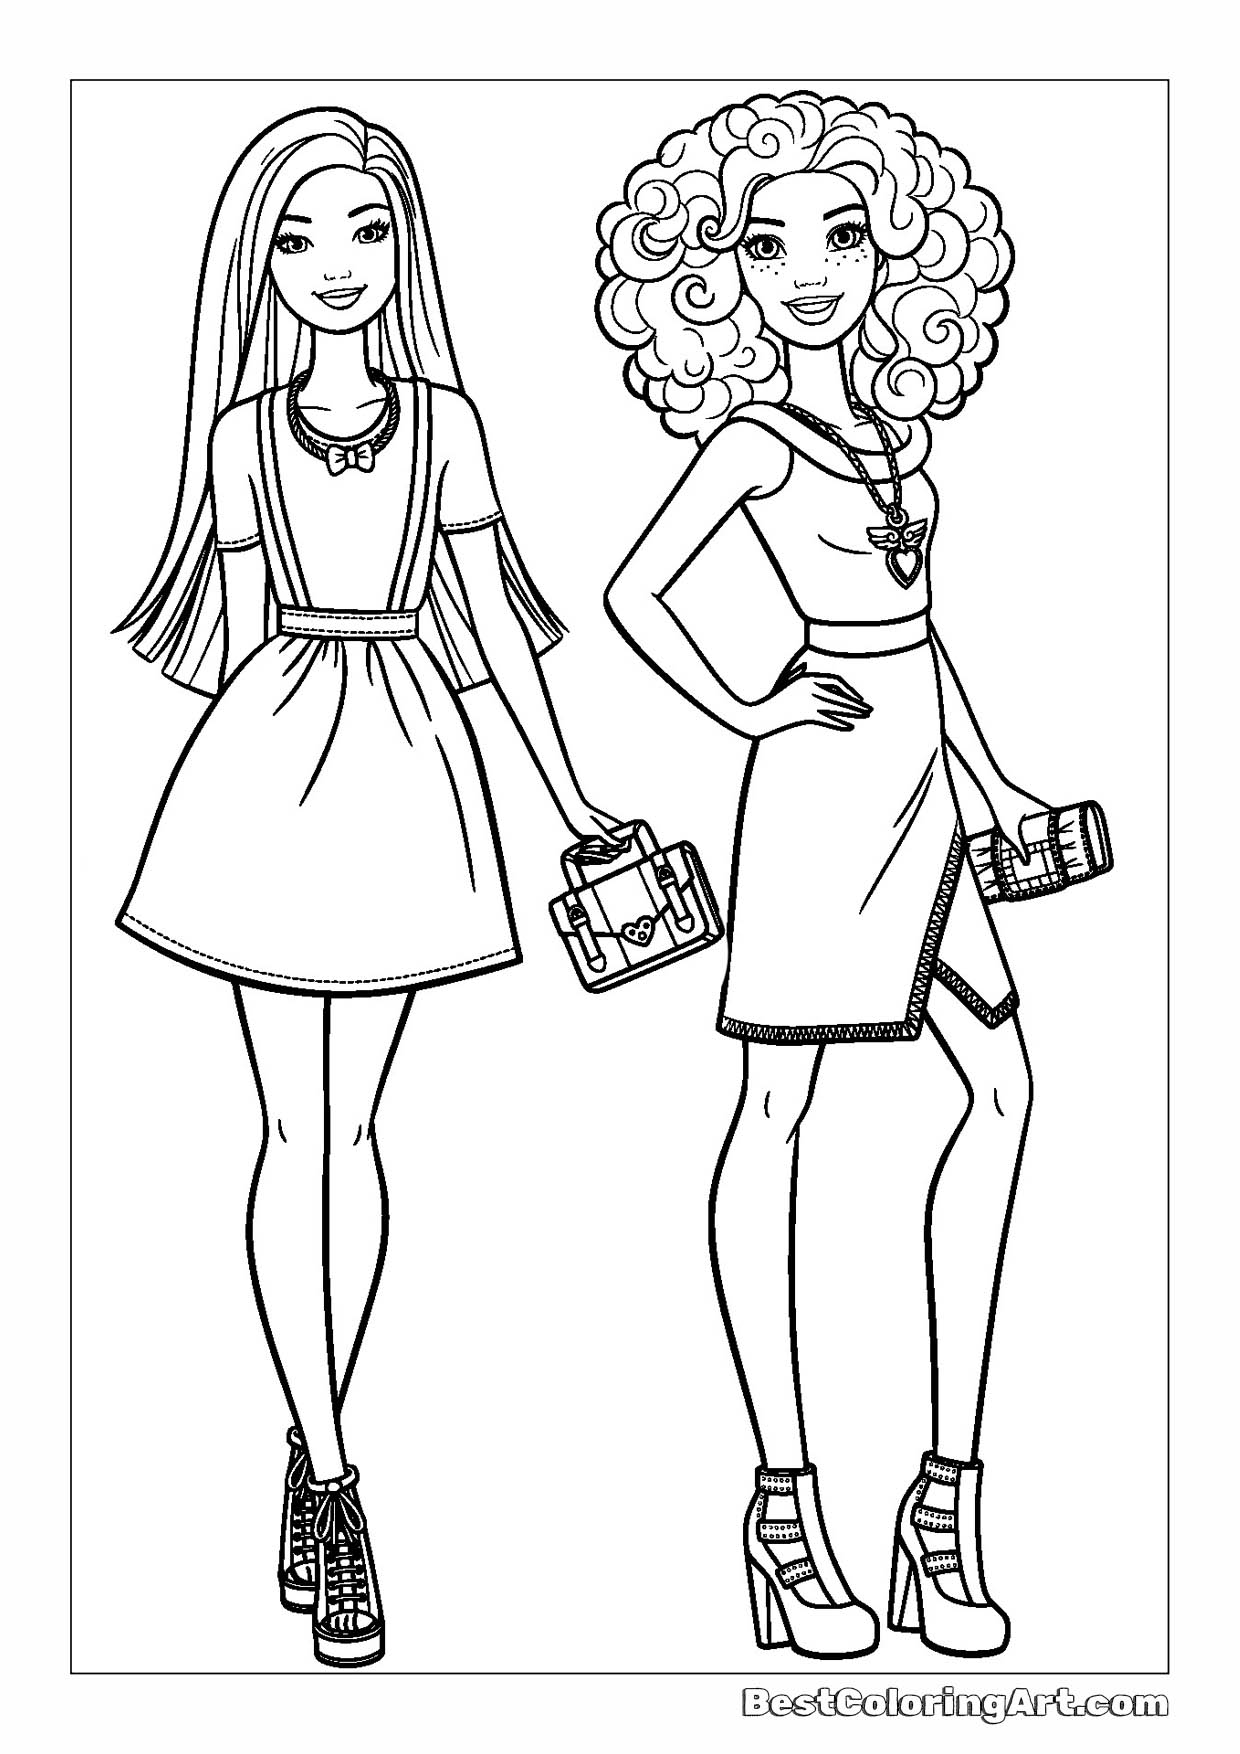 Barbie friends - Barbie coloring page - Printable & Free PDFs